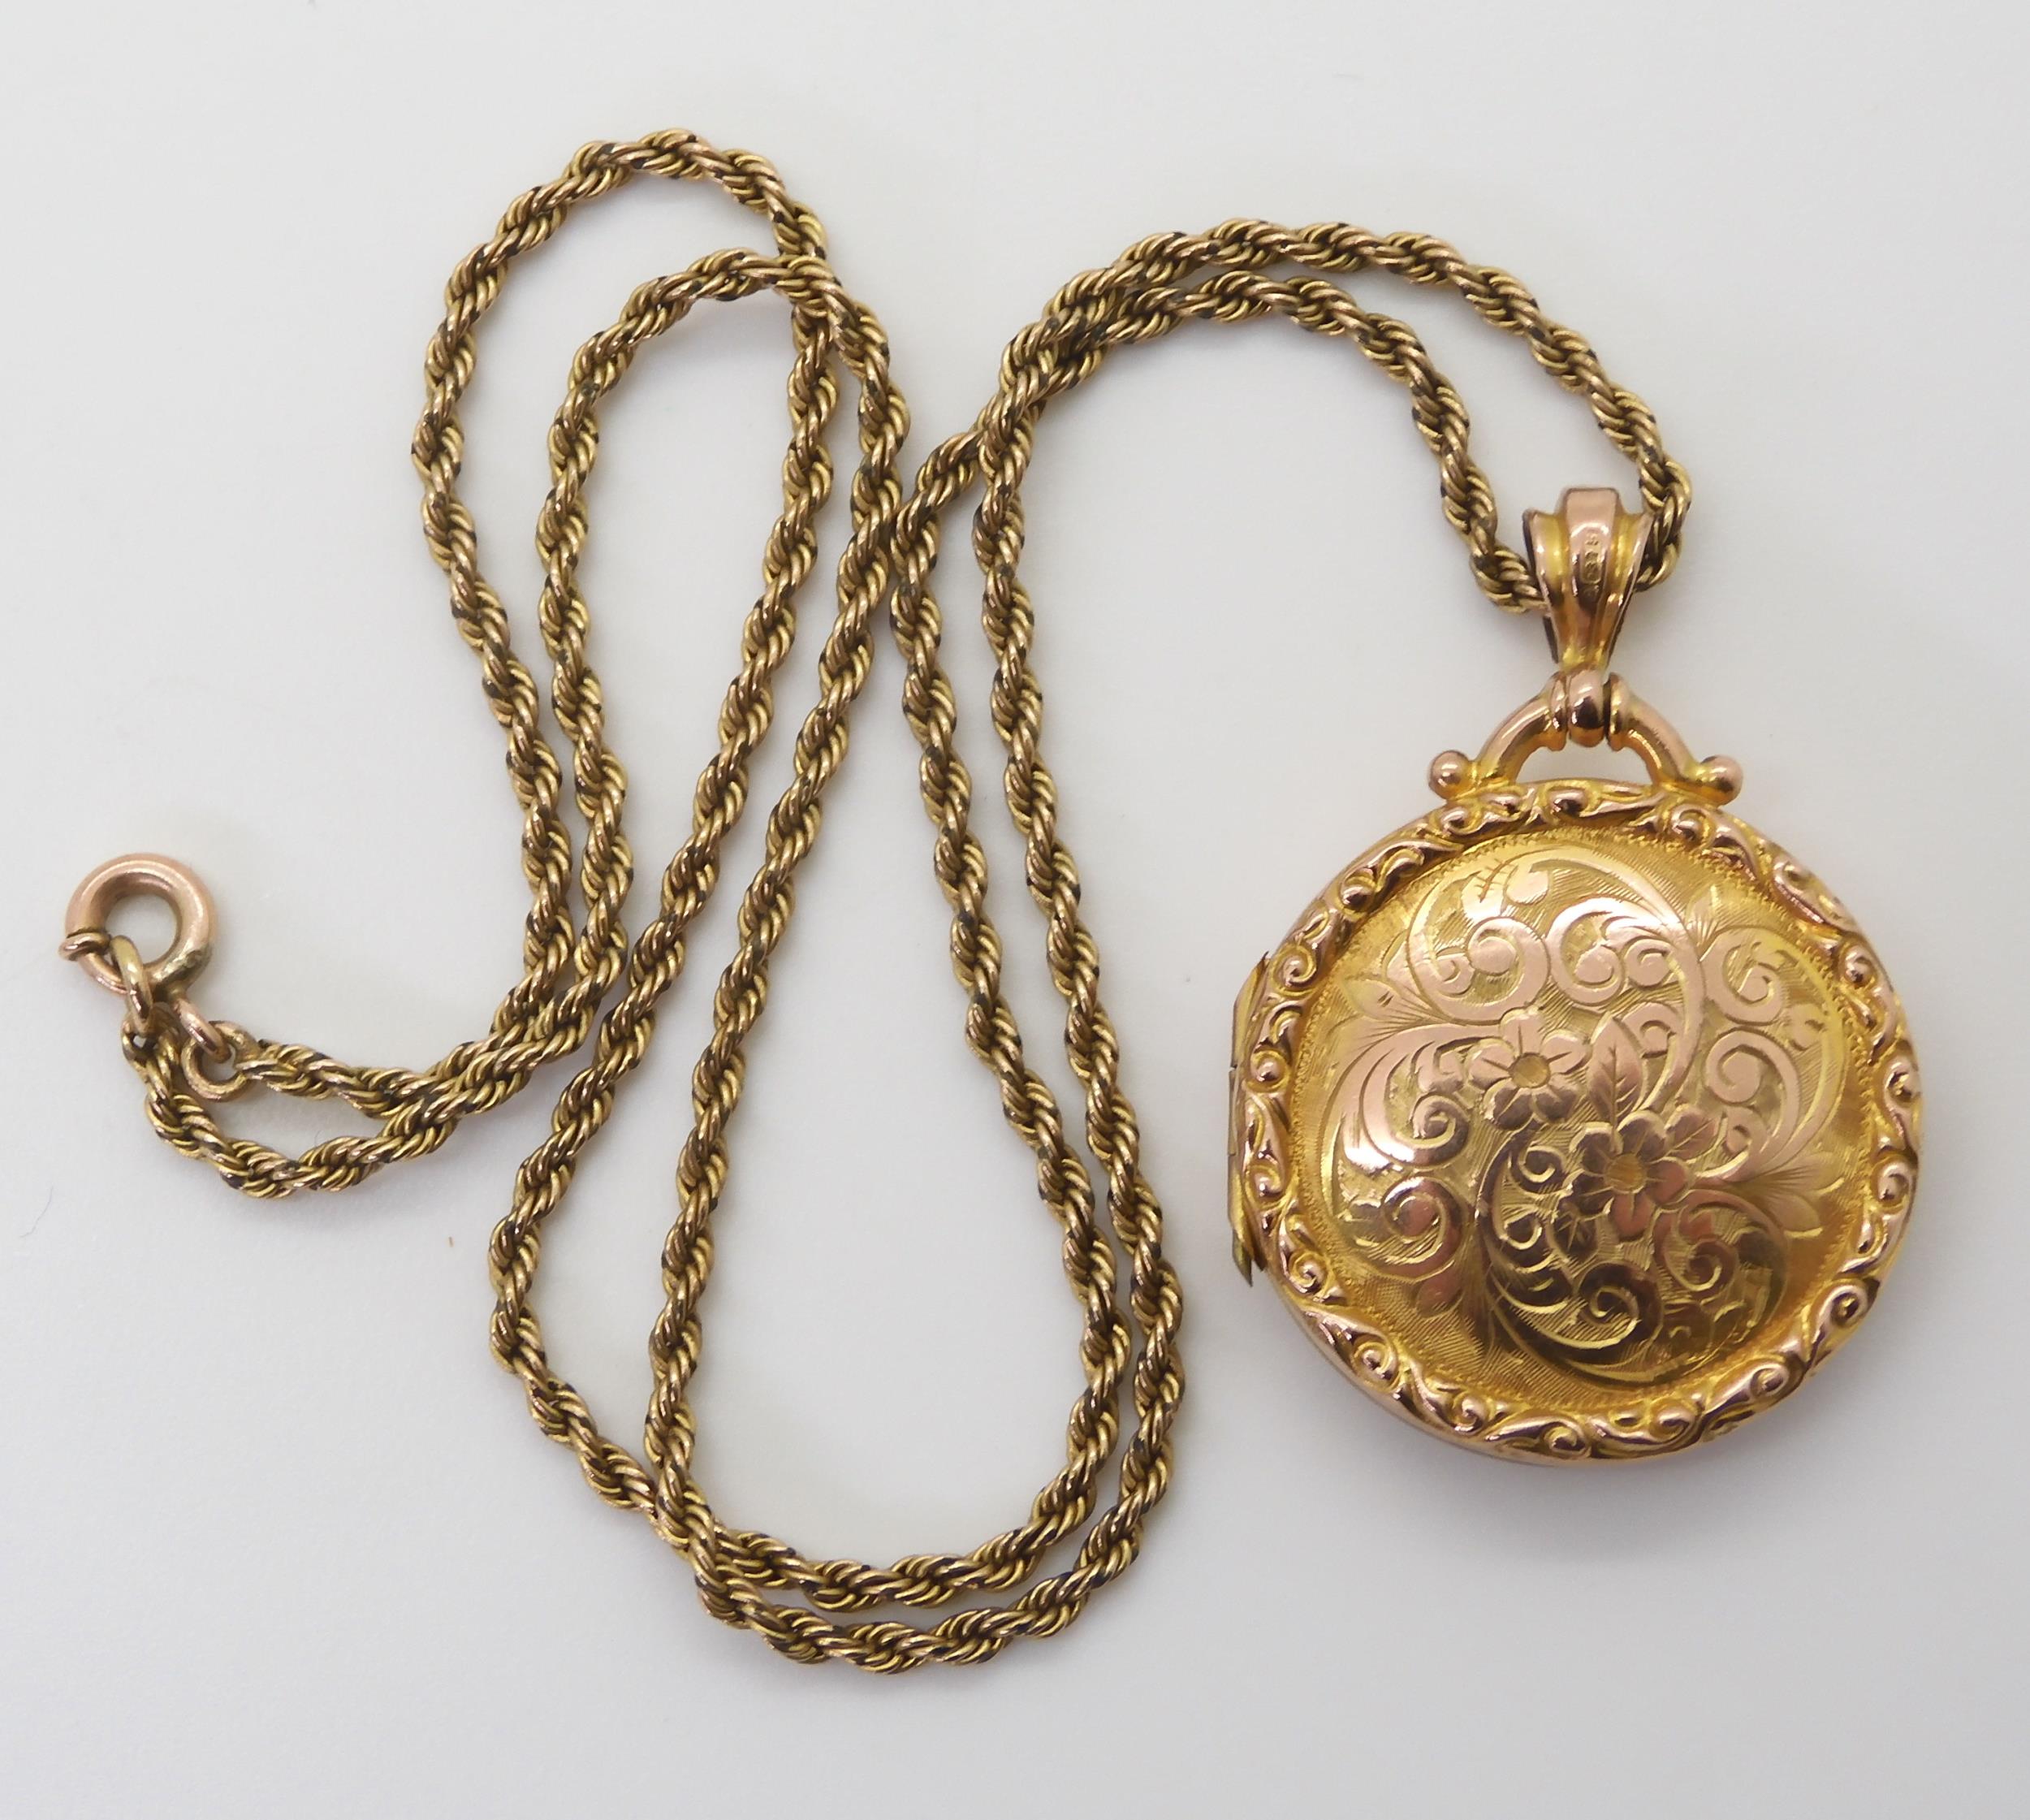 A 9ct gold circular locket hallmarked Birmingham 1911, monogram to the back, with a yellow metal